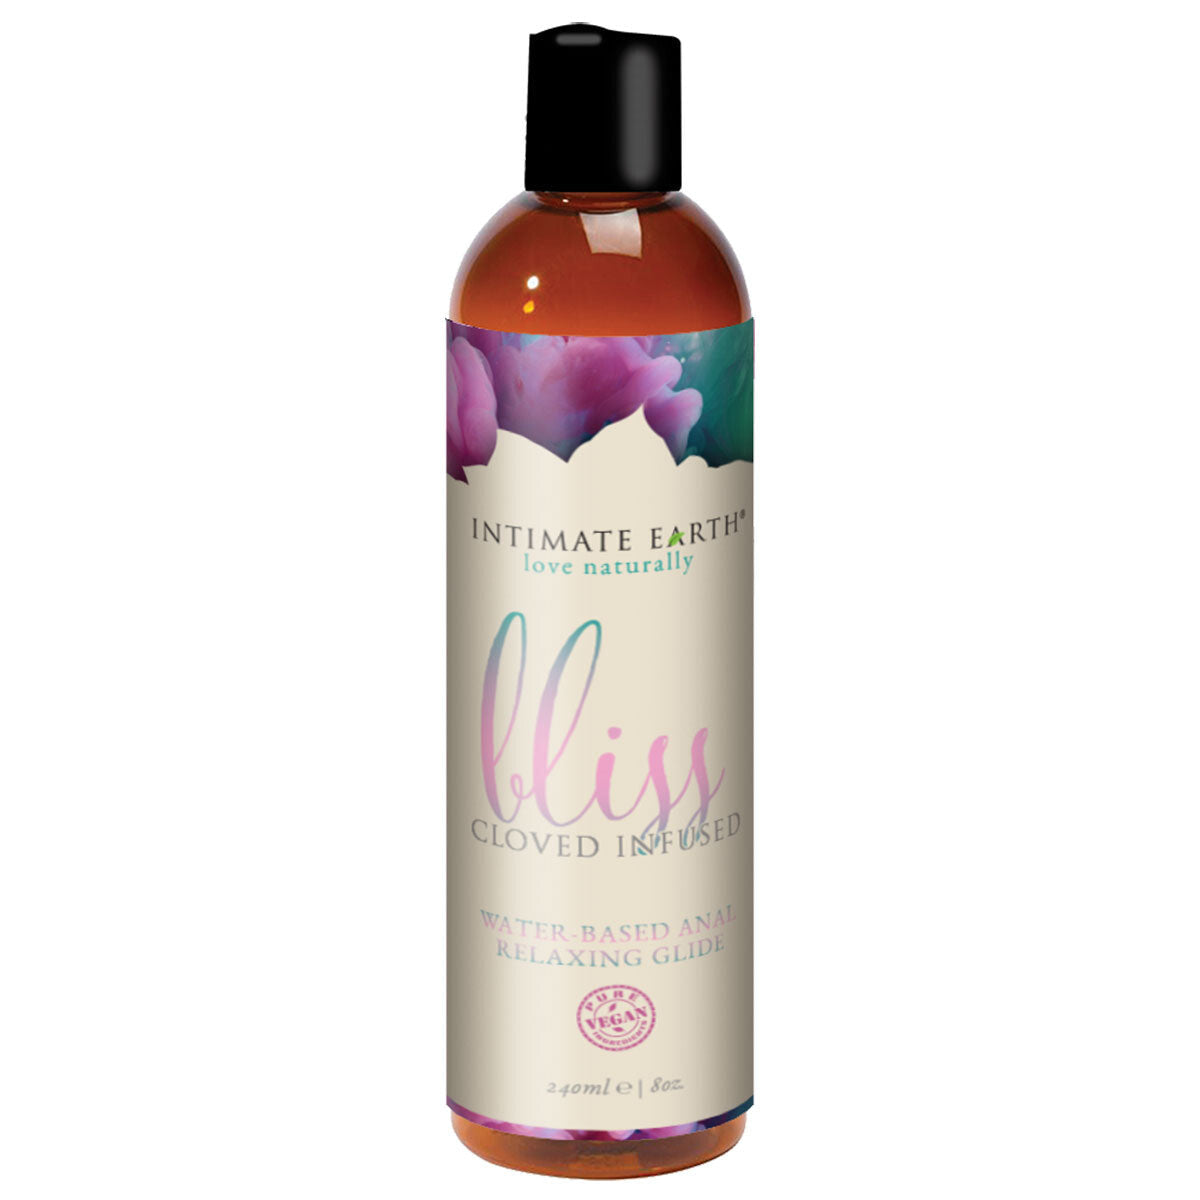 Intimate Earth Bliss Water-Based Anal Relaxing Glide 8oz Intimates Adult Boutique